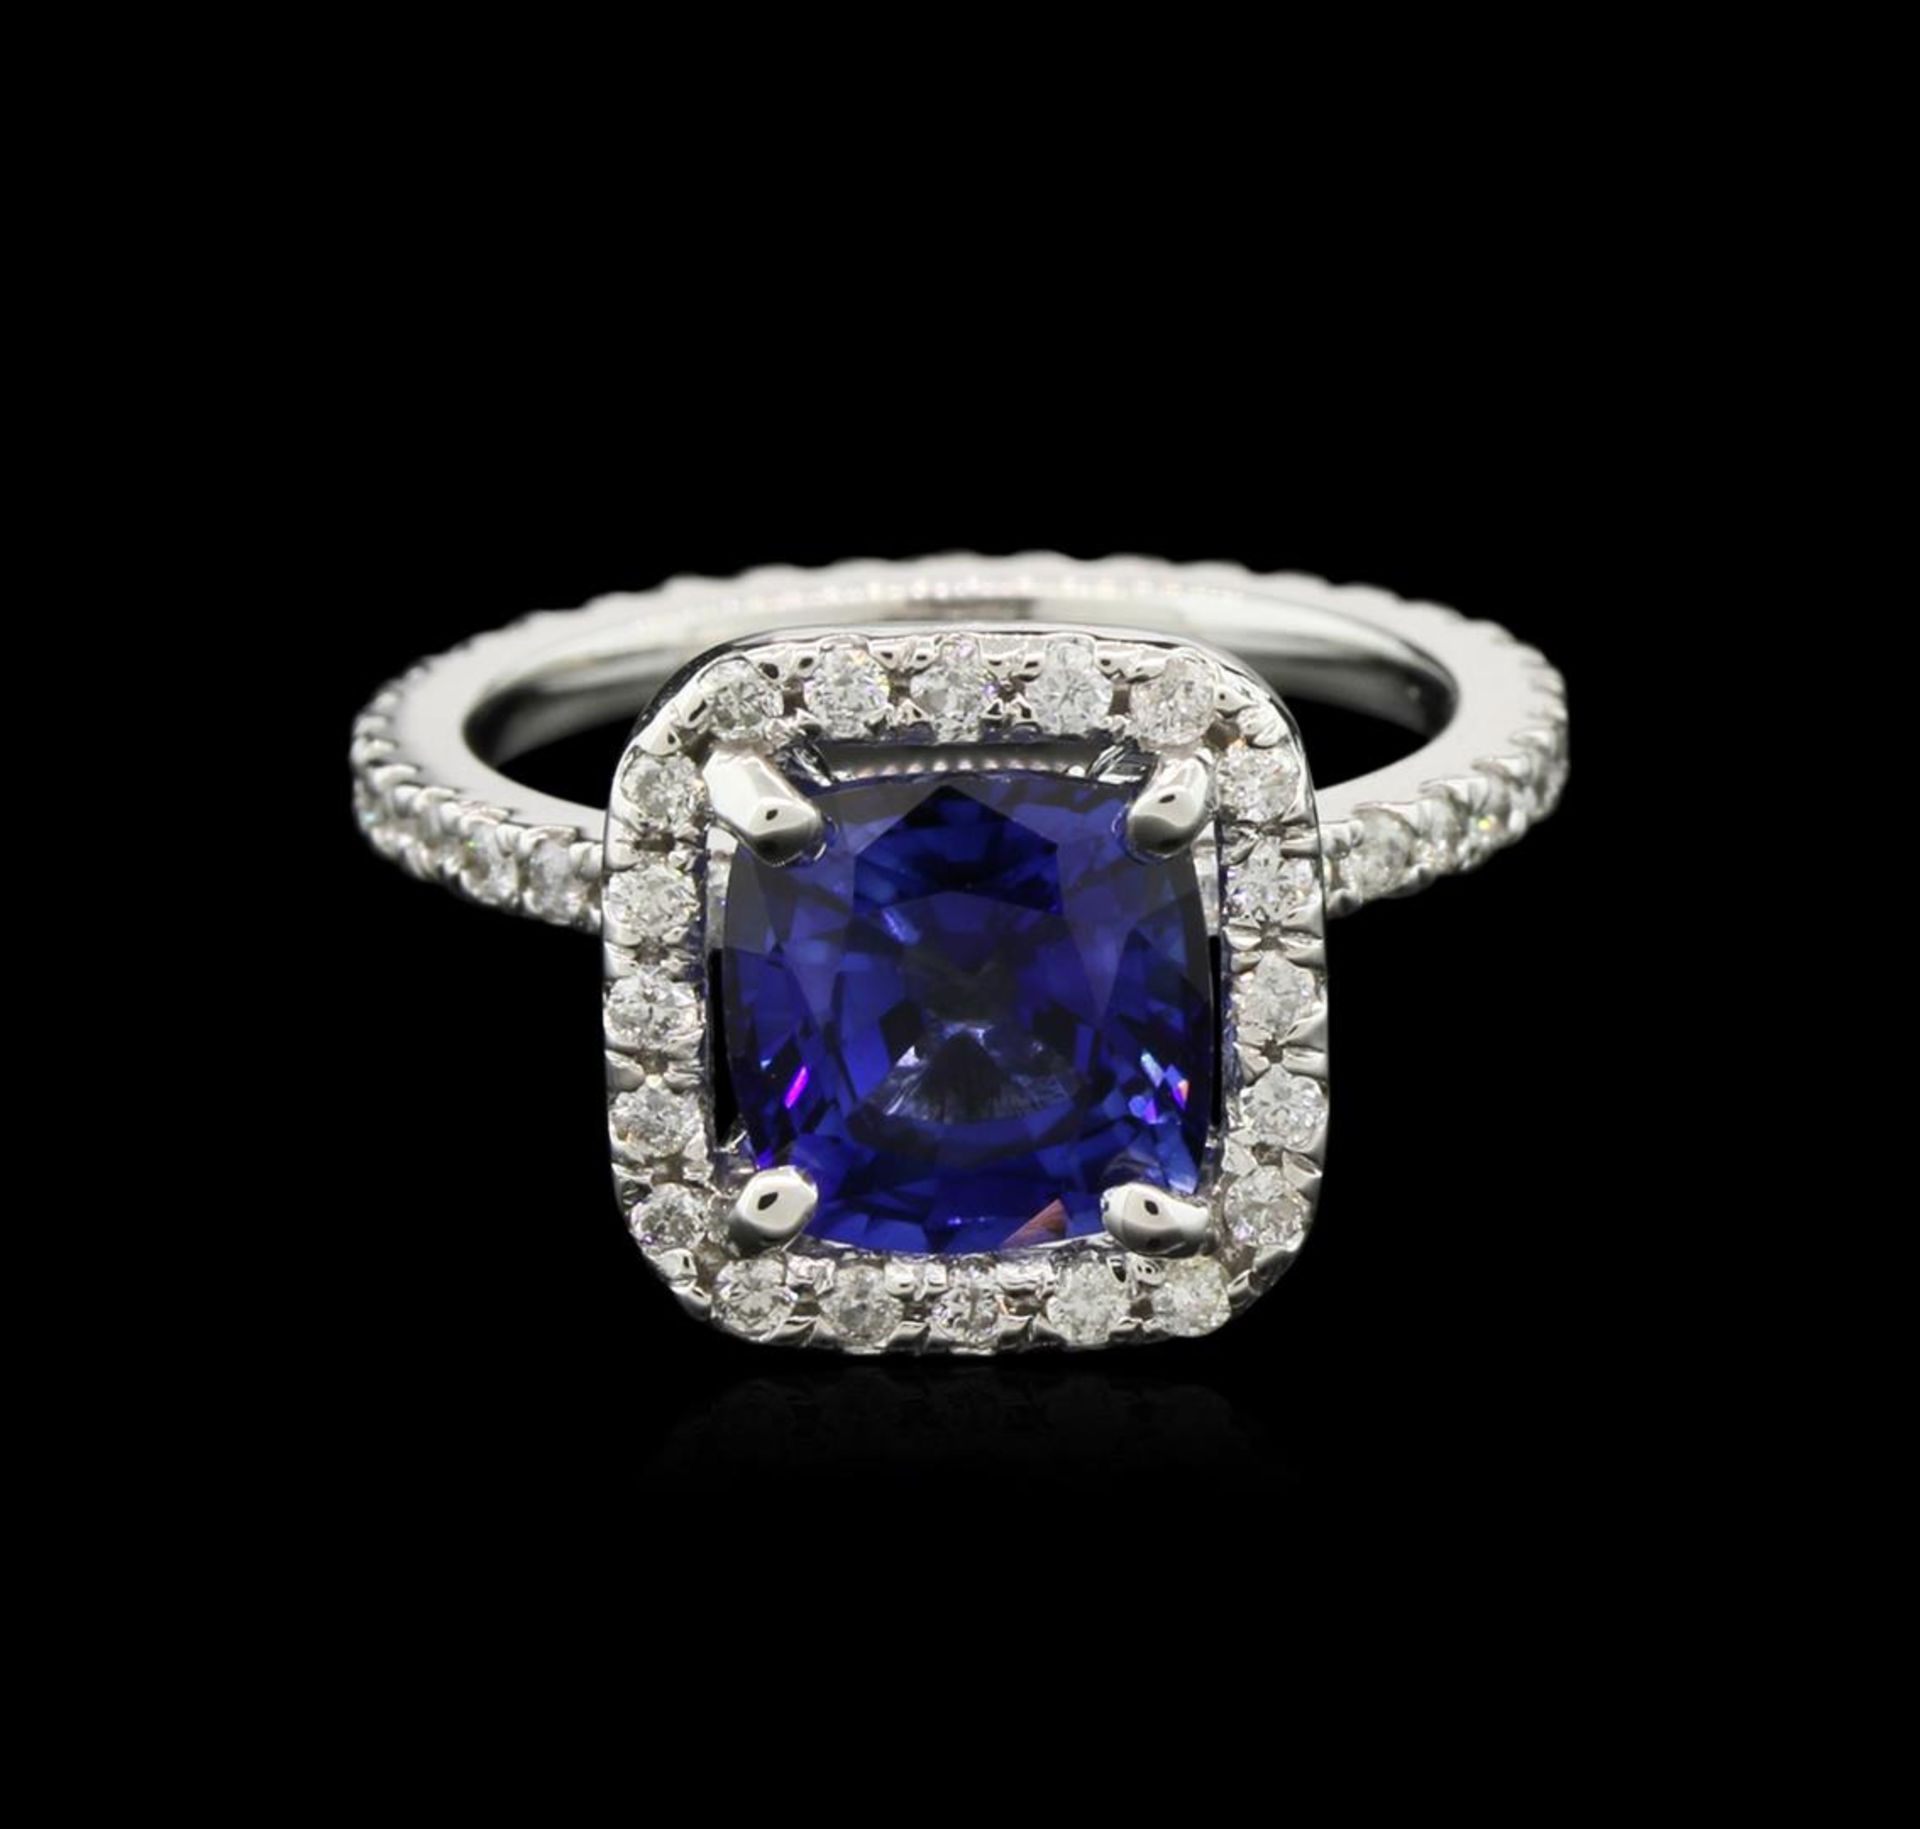 2.80 ctw Blue Sapphire and Diamond Ring - 14KT White Gold - Image 2 of 3